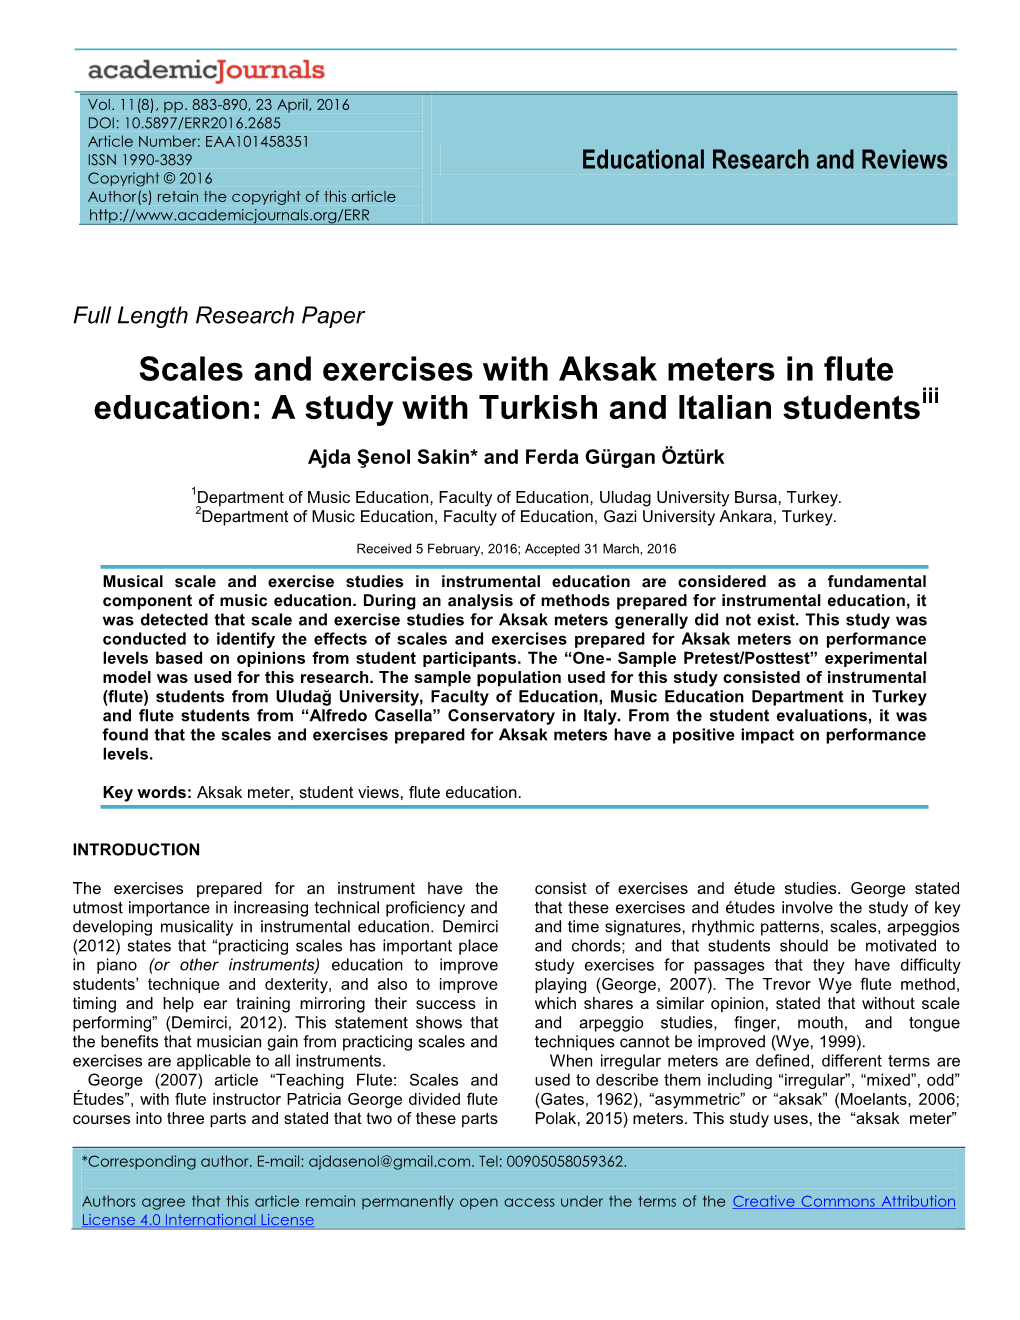 Scales and Exercises with Aksak Meters in Flute Education: a Study with Turkish and Italian Studentsiii